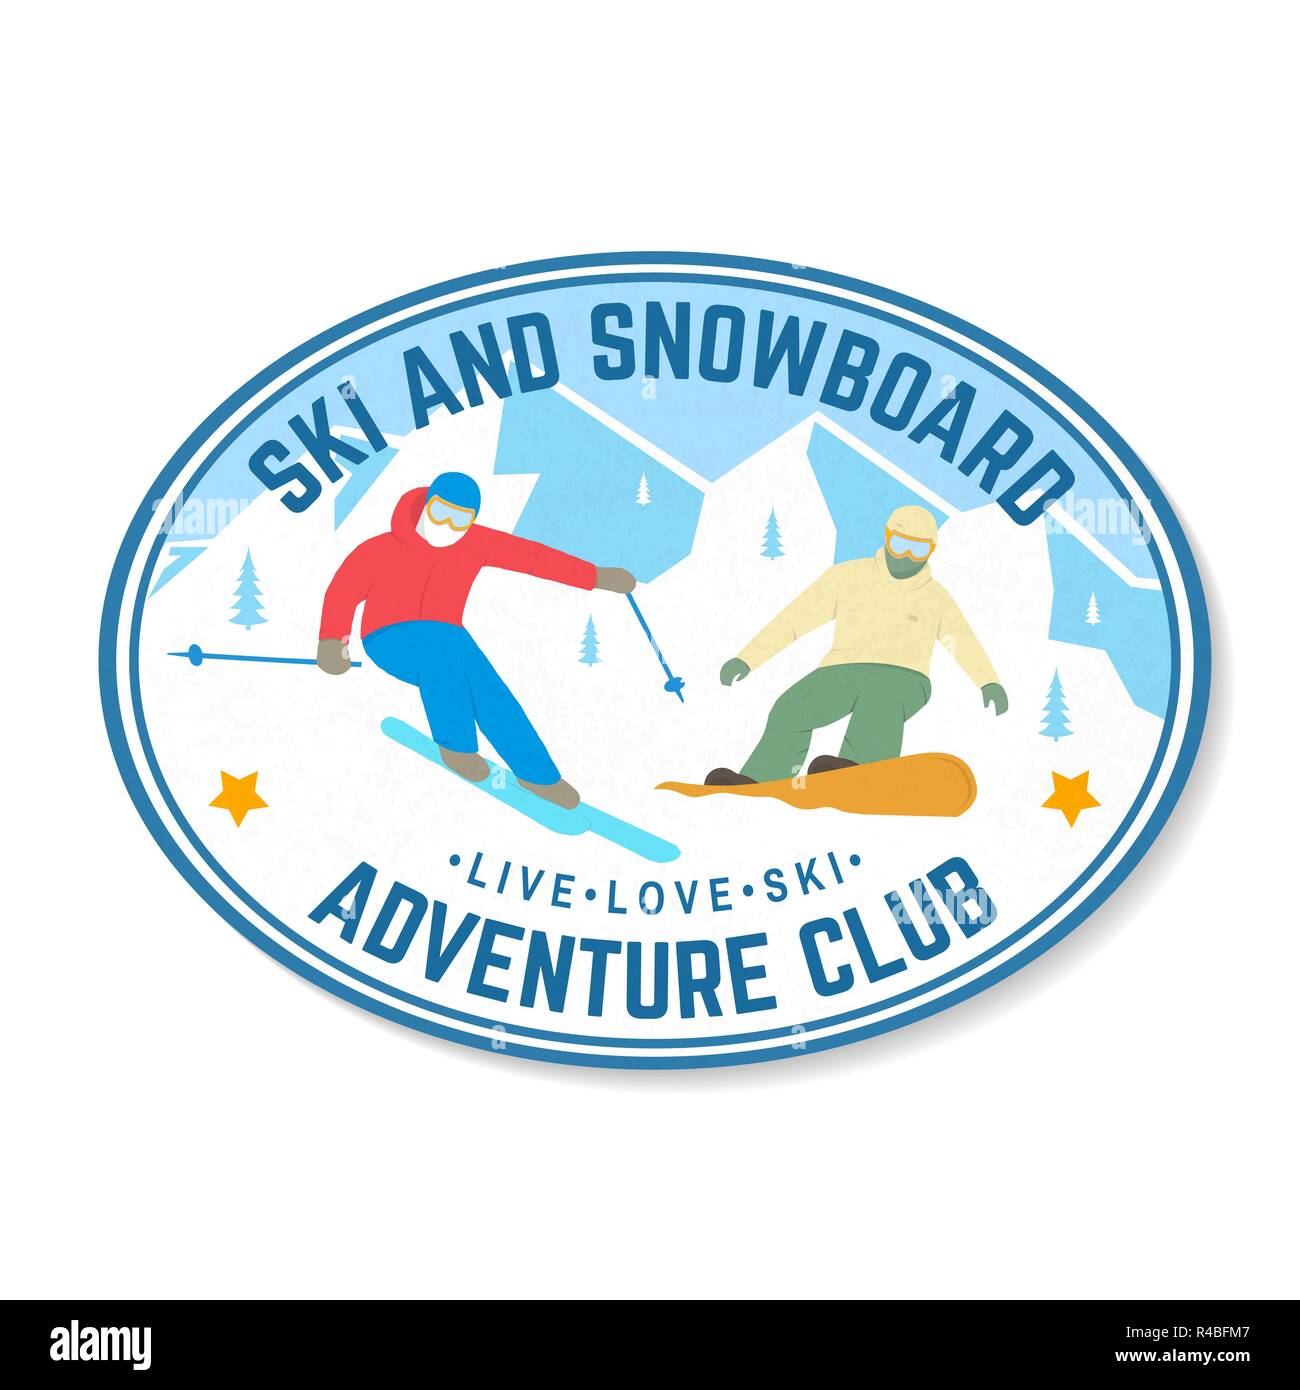 Ski and Snowboard Club. Vector illustration. Concept for shirt, print, stamp, badge or tee. Vintage typography design with snowboarder and skier silhouette. Winter Extreme sport. Stock Vector